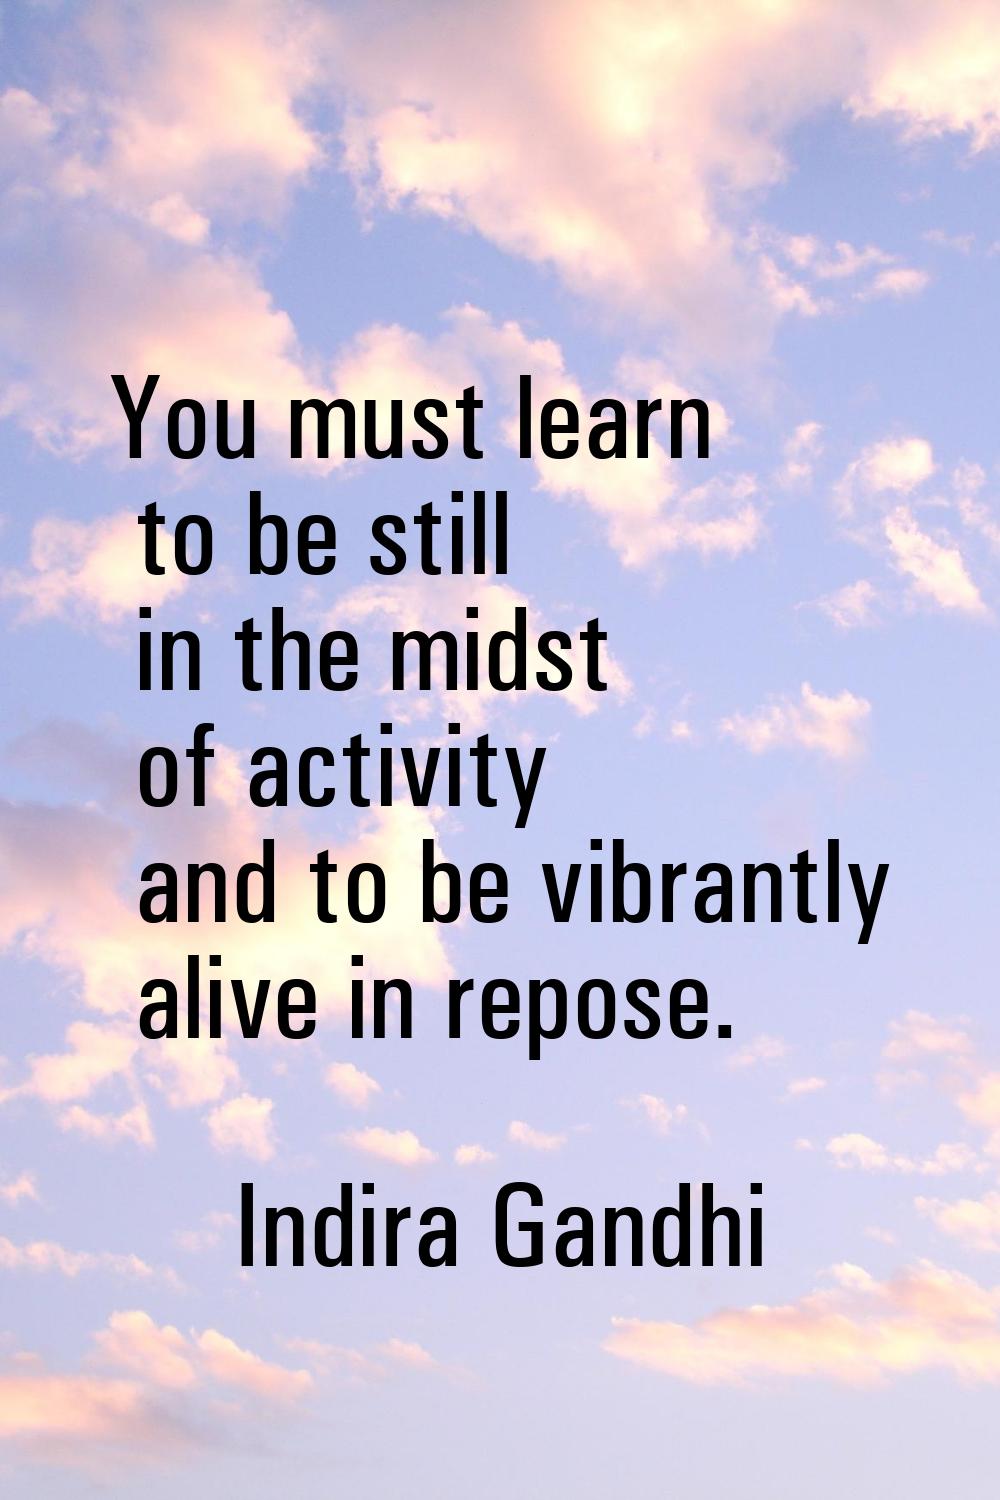 You must learn to be still in the midst of activity and to be vibrantly alive in repose.